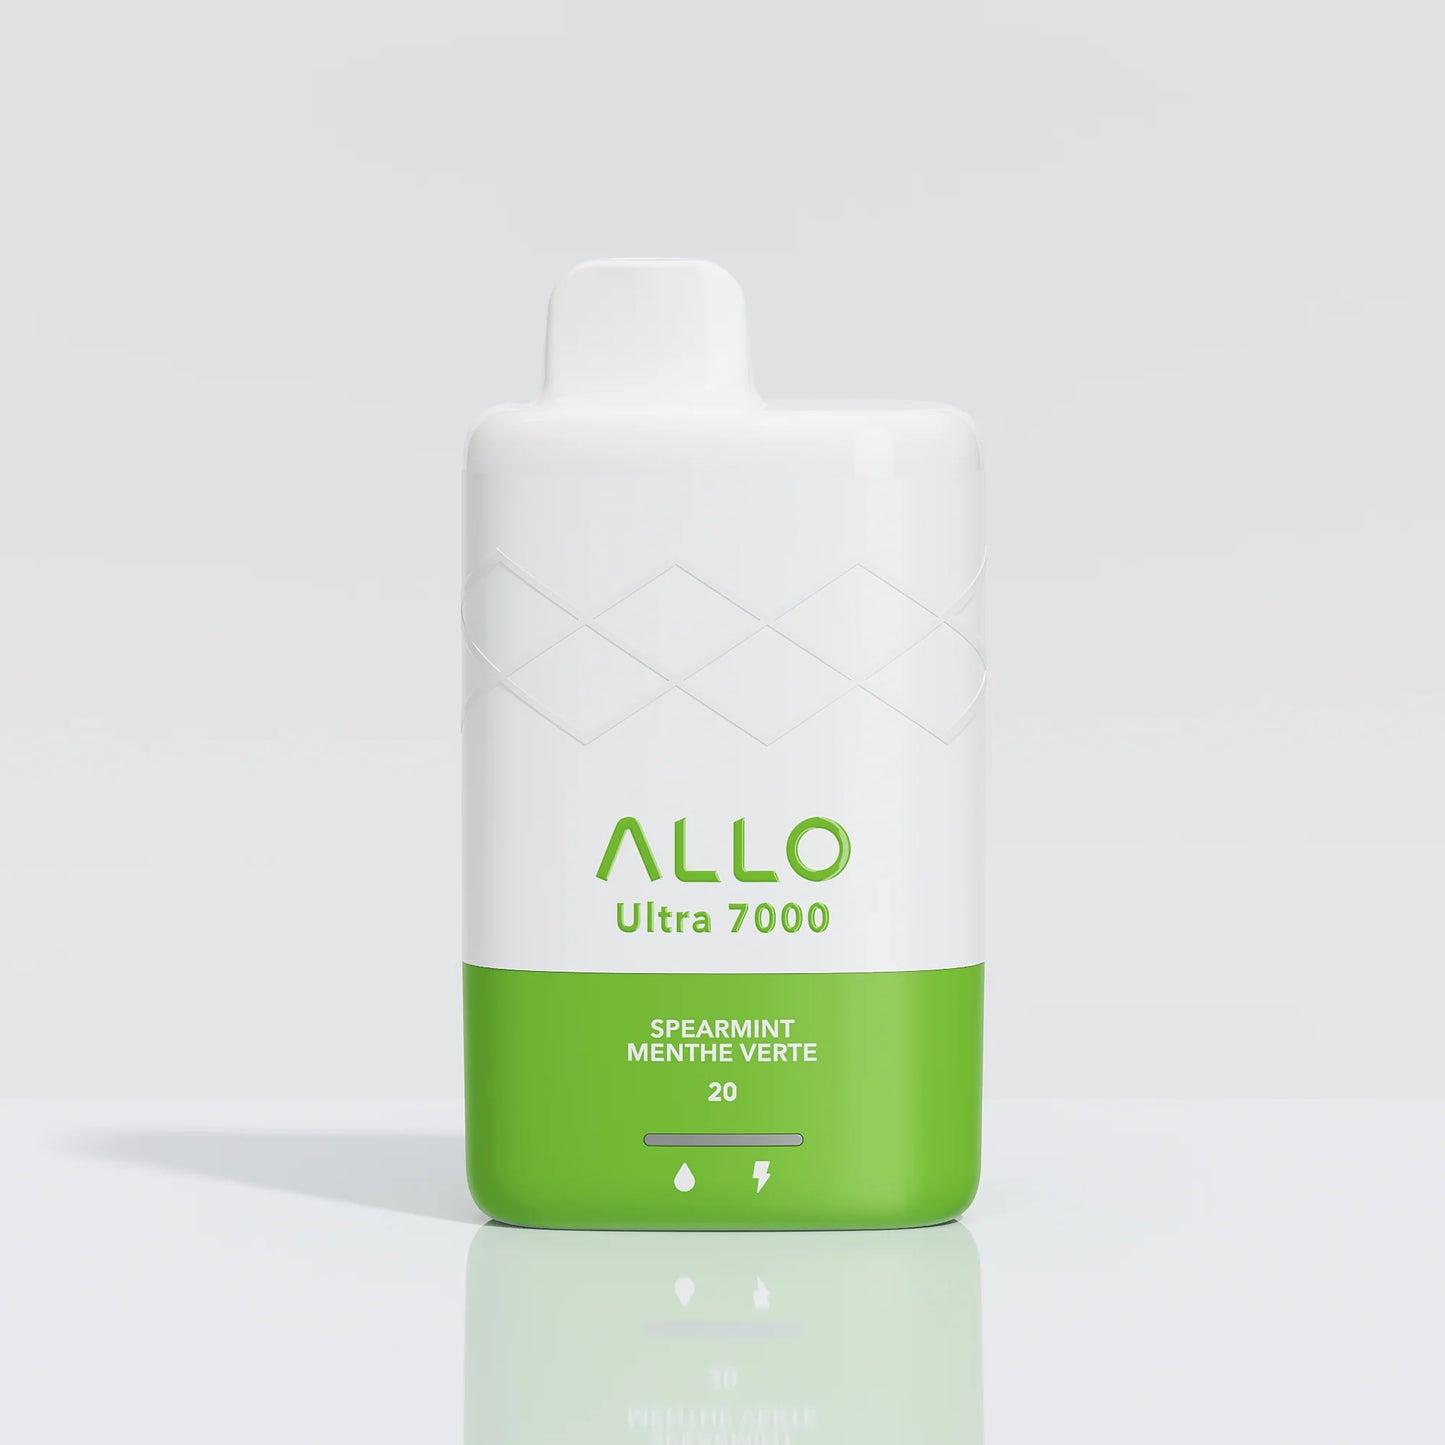 Allo Ultra 7000 Spearmint 20mg (Excise Tax)